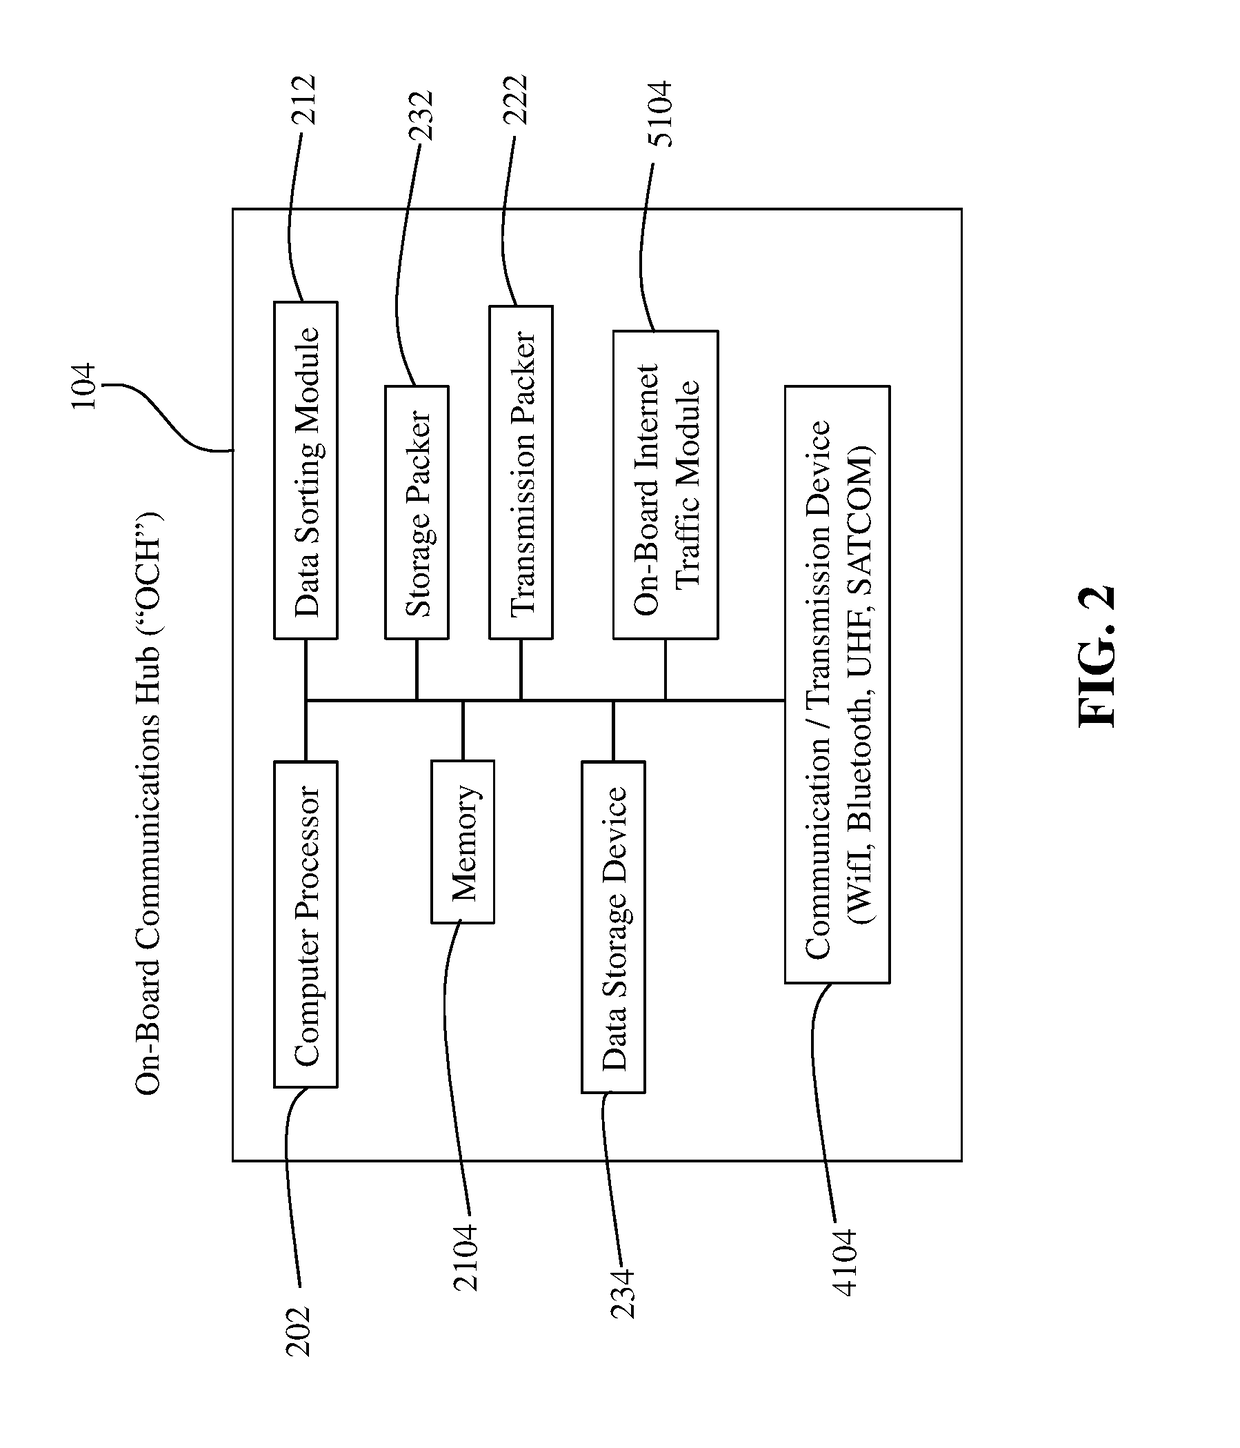 System and method for crowd sourcing aircraft data communications